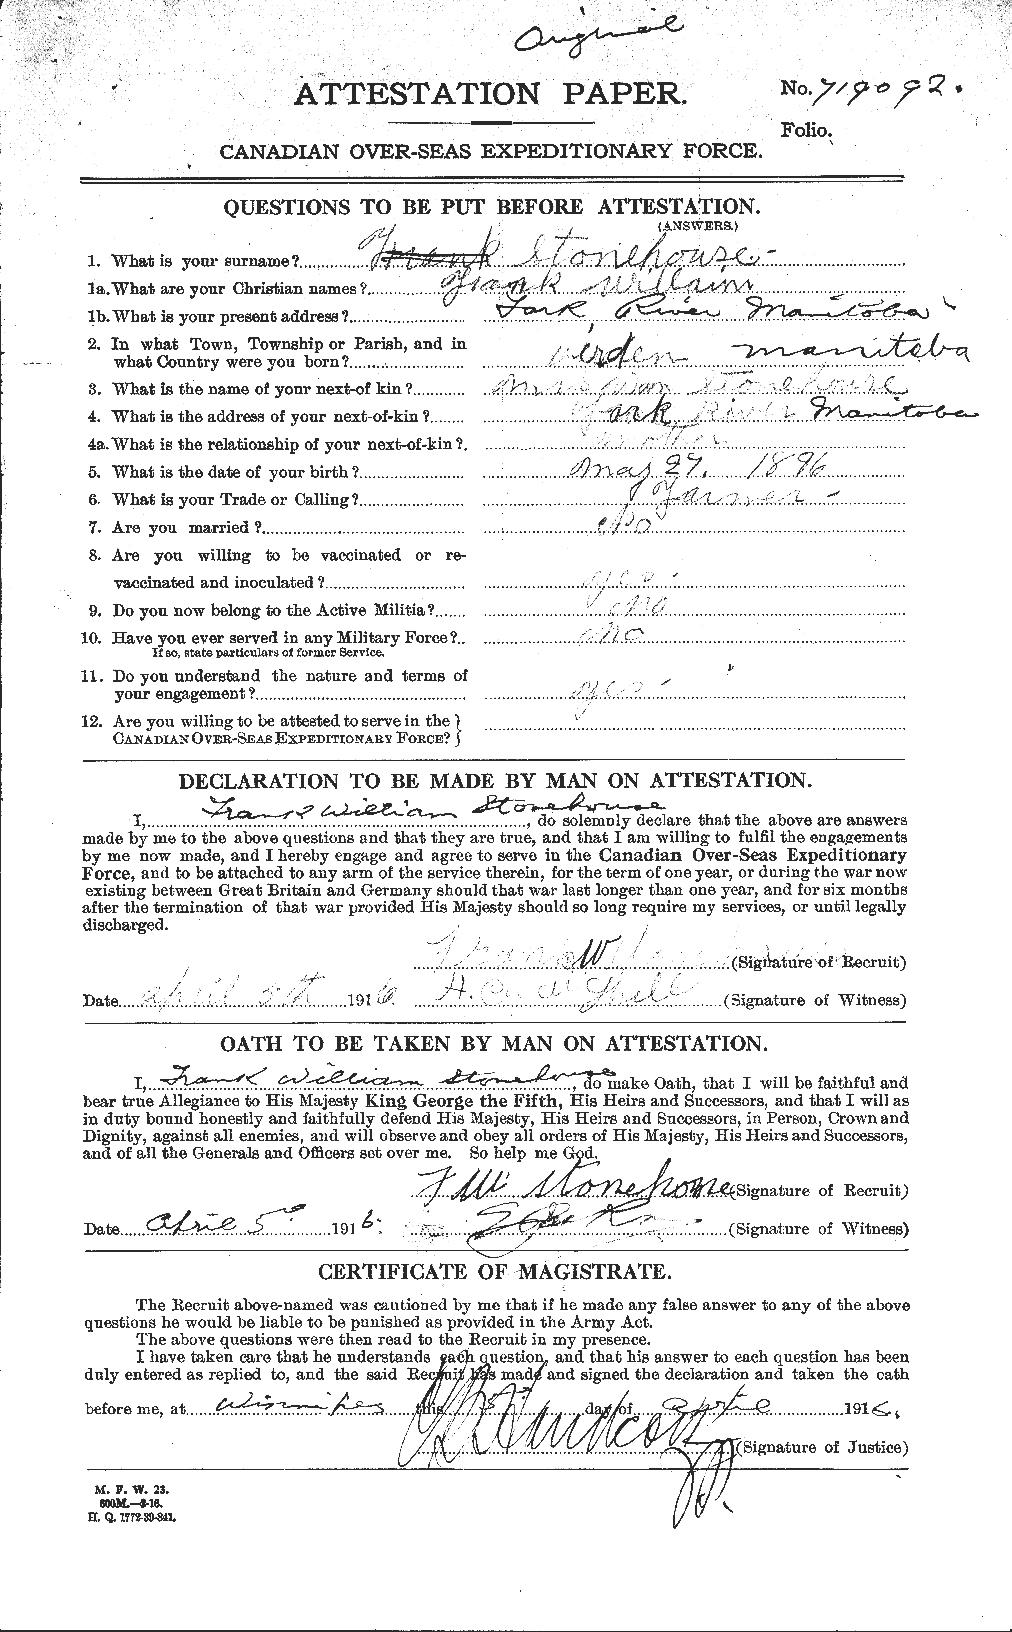 Personnel Records of the First World War - CEF 121539a